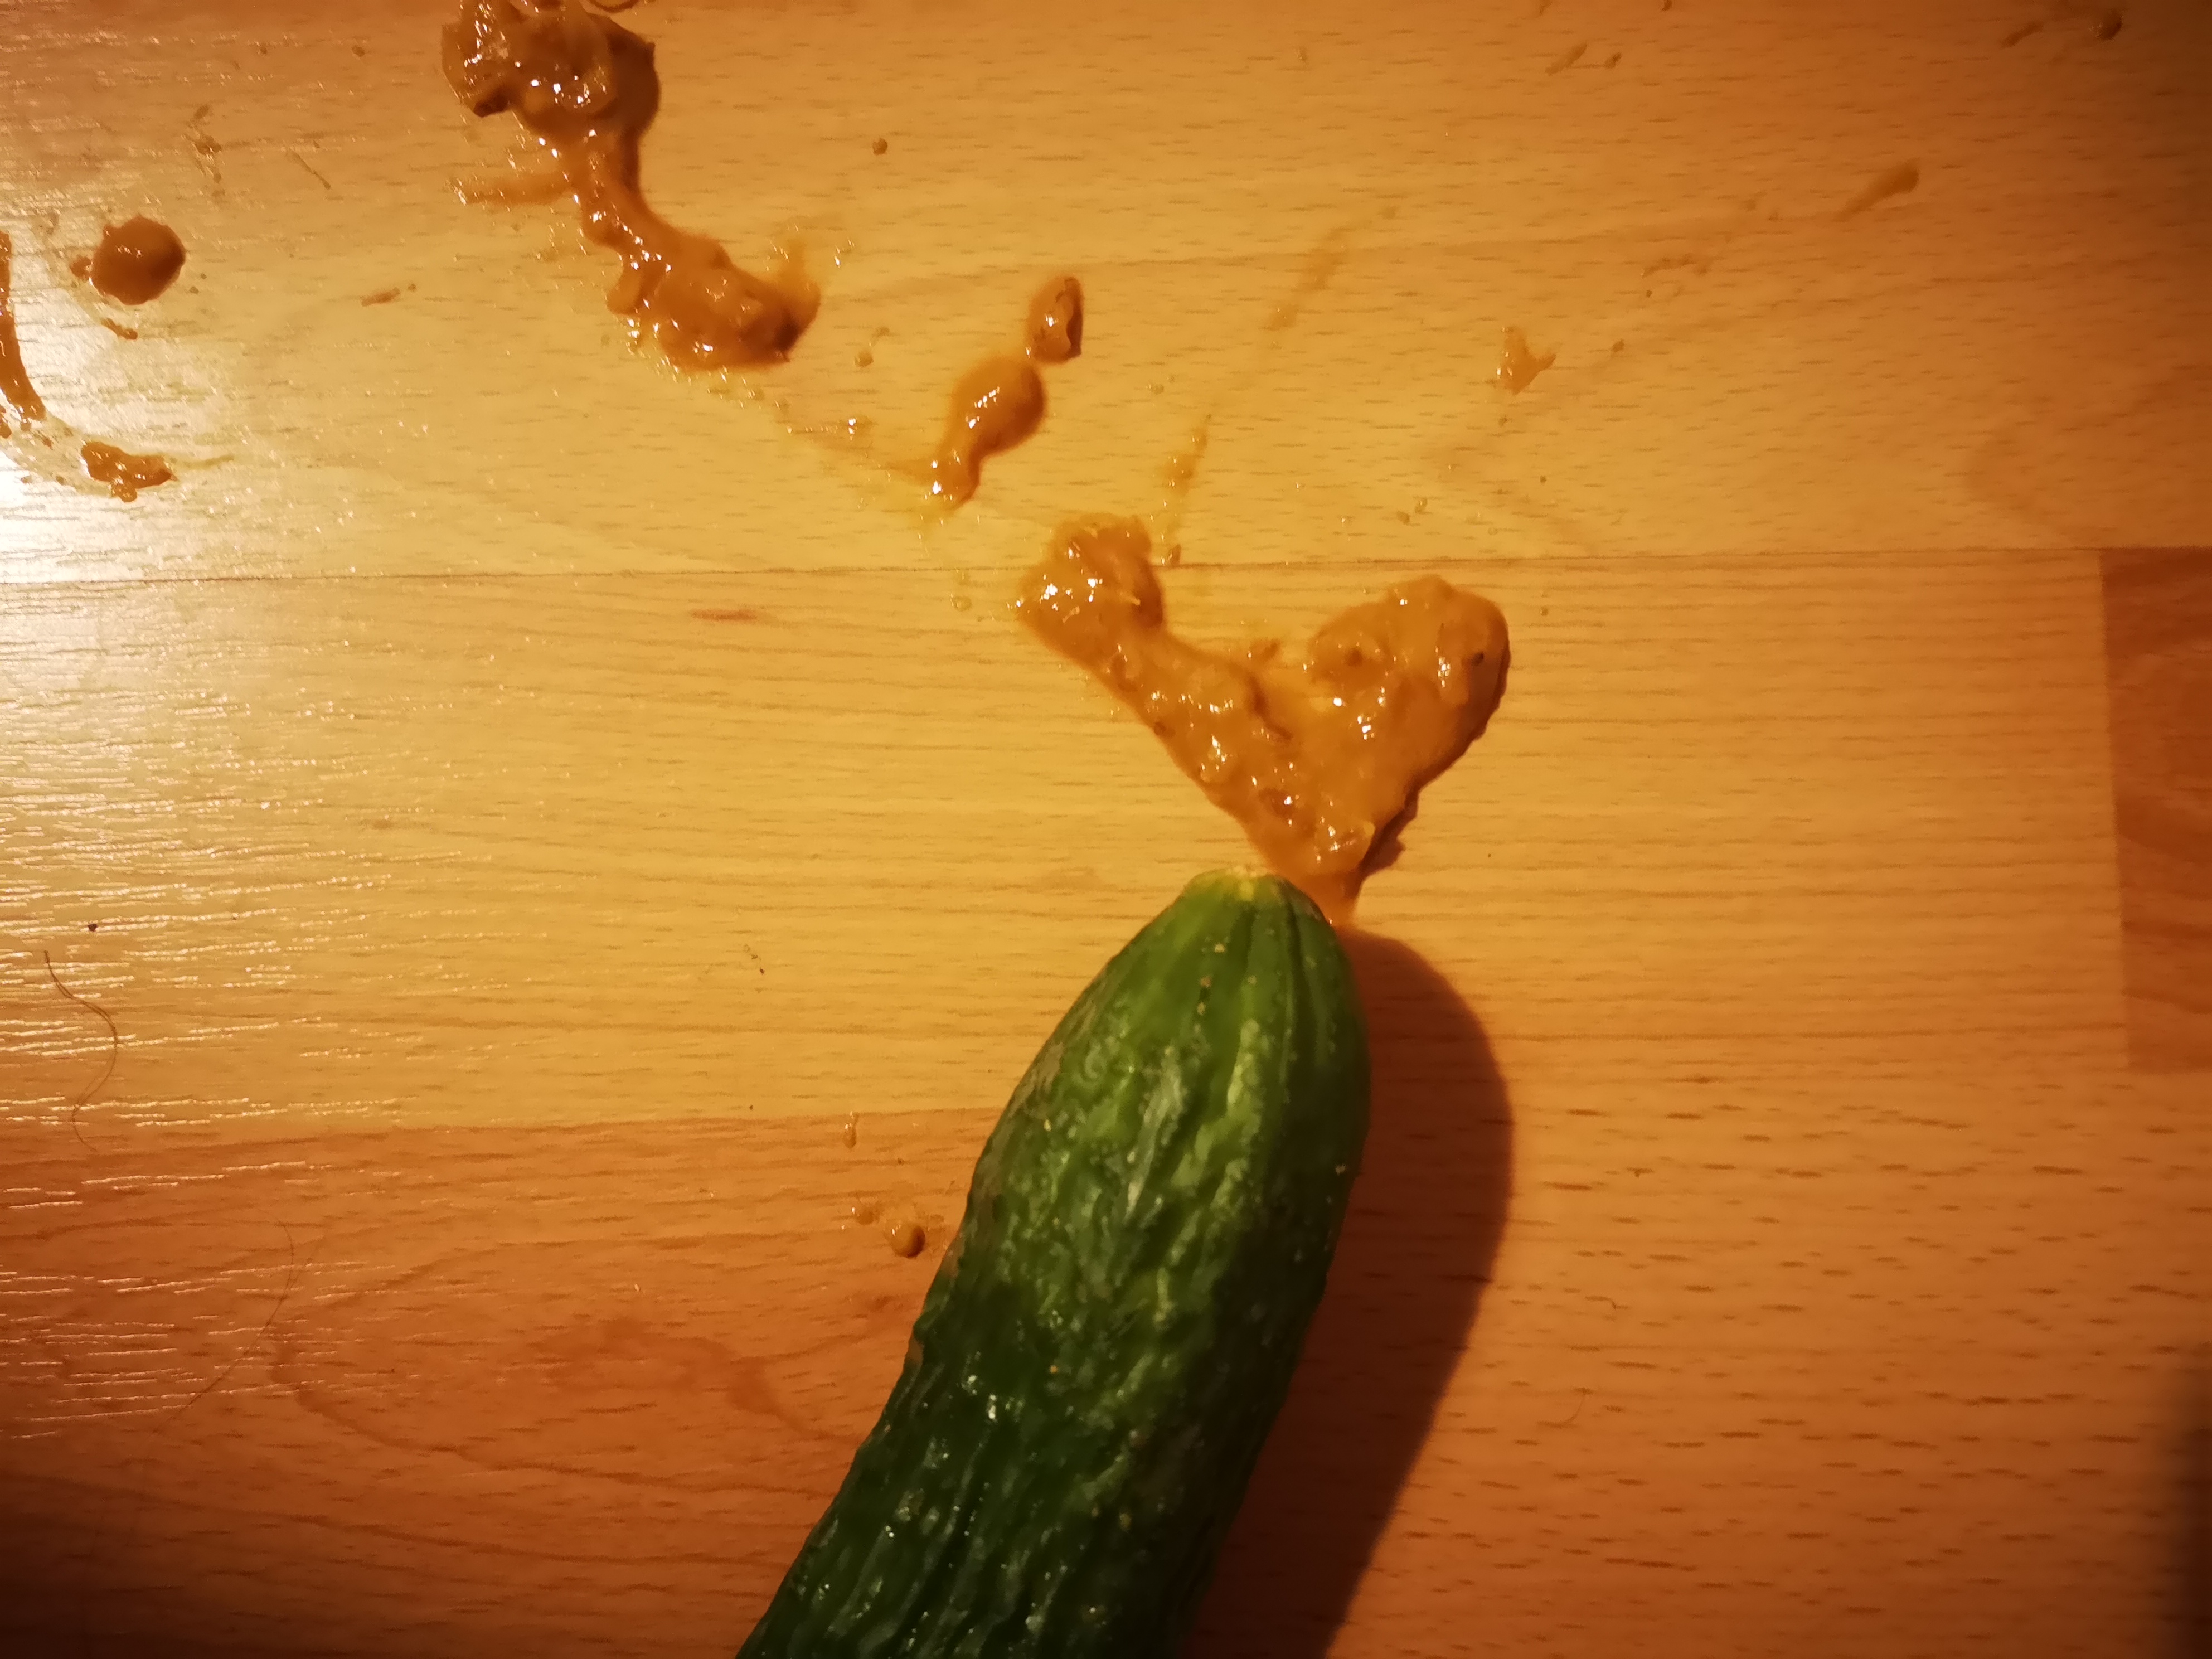 Shitty anal with cucumber picture